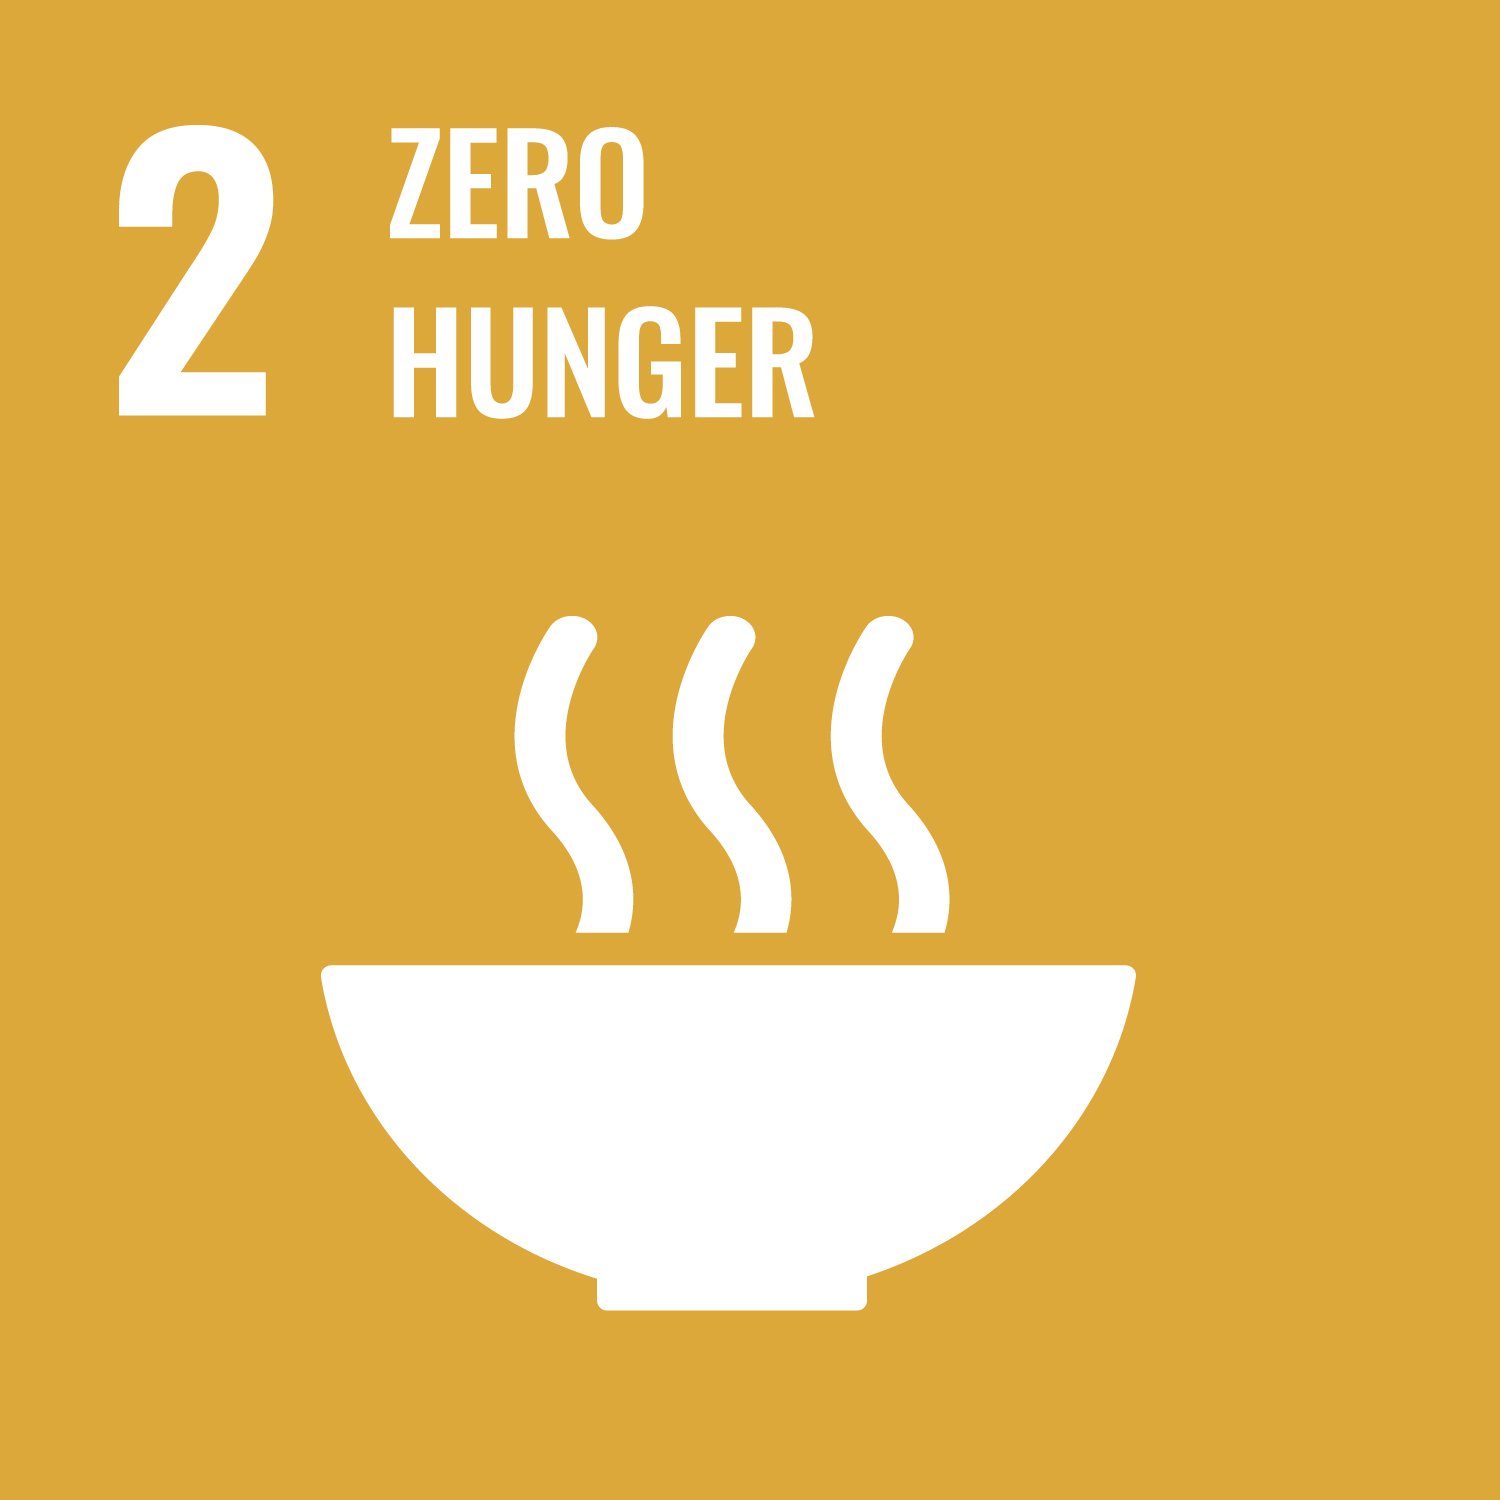 White writing on an ochre background: 2 Zero hunger, below a pictogram of a bowl with three dashes as steam